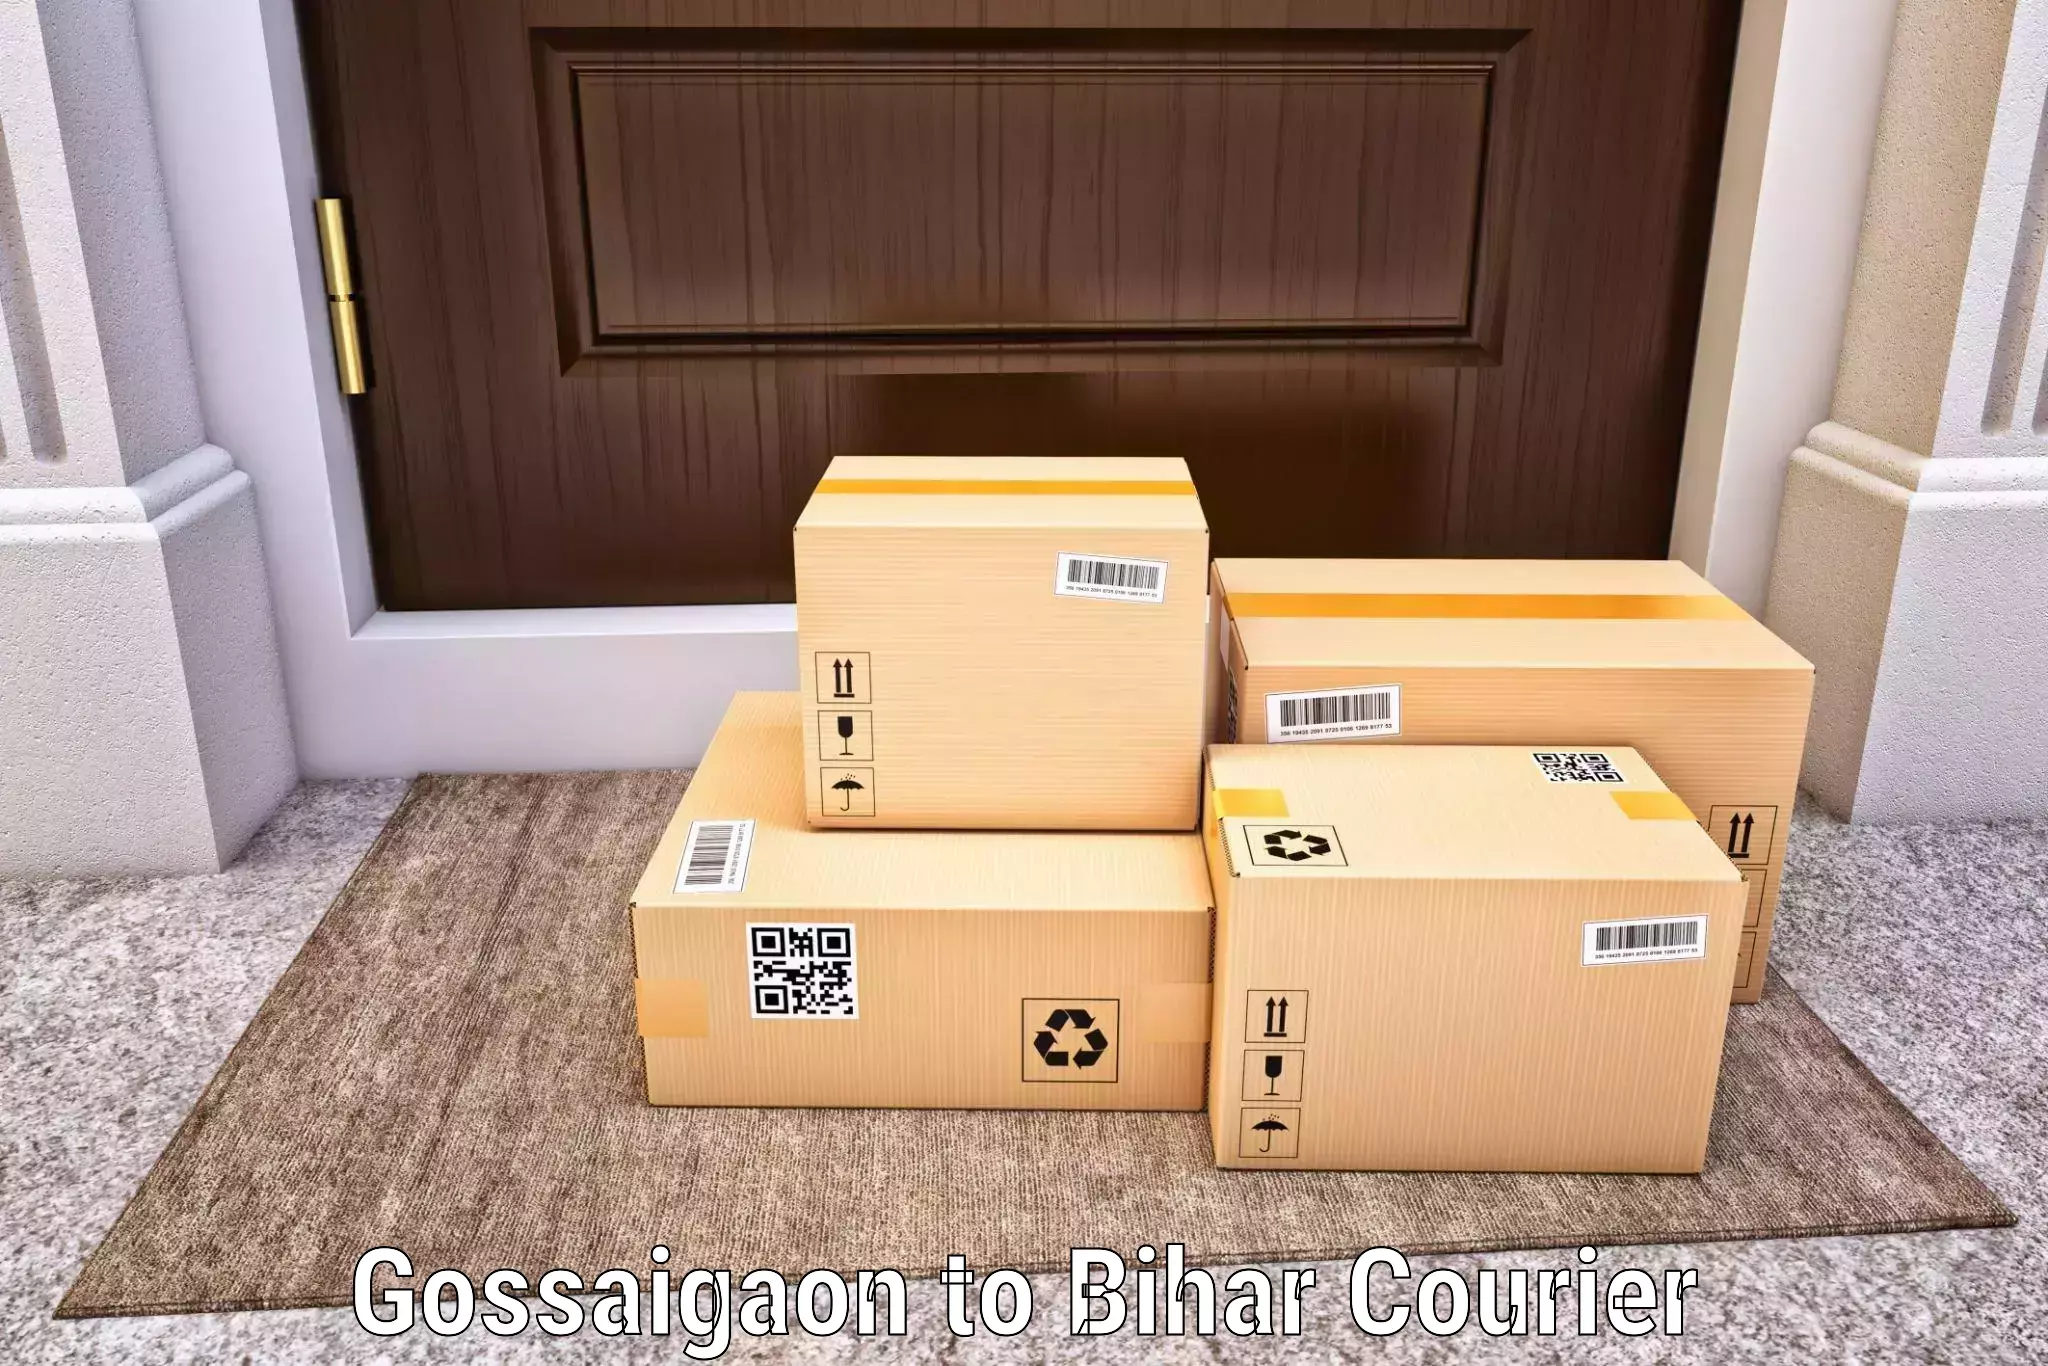 Secure package delivery in Gossaigaon to Purnia